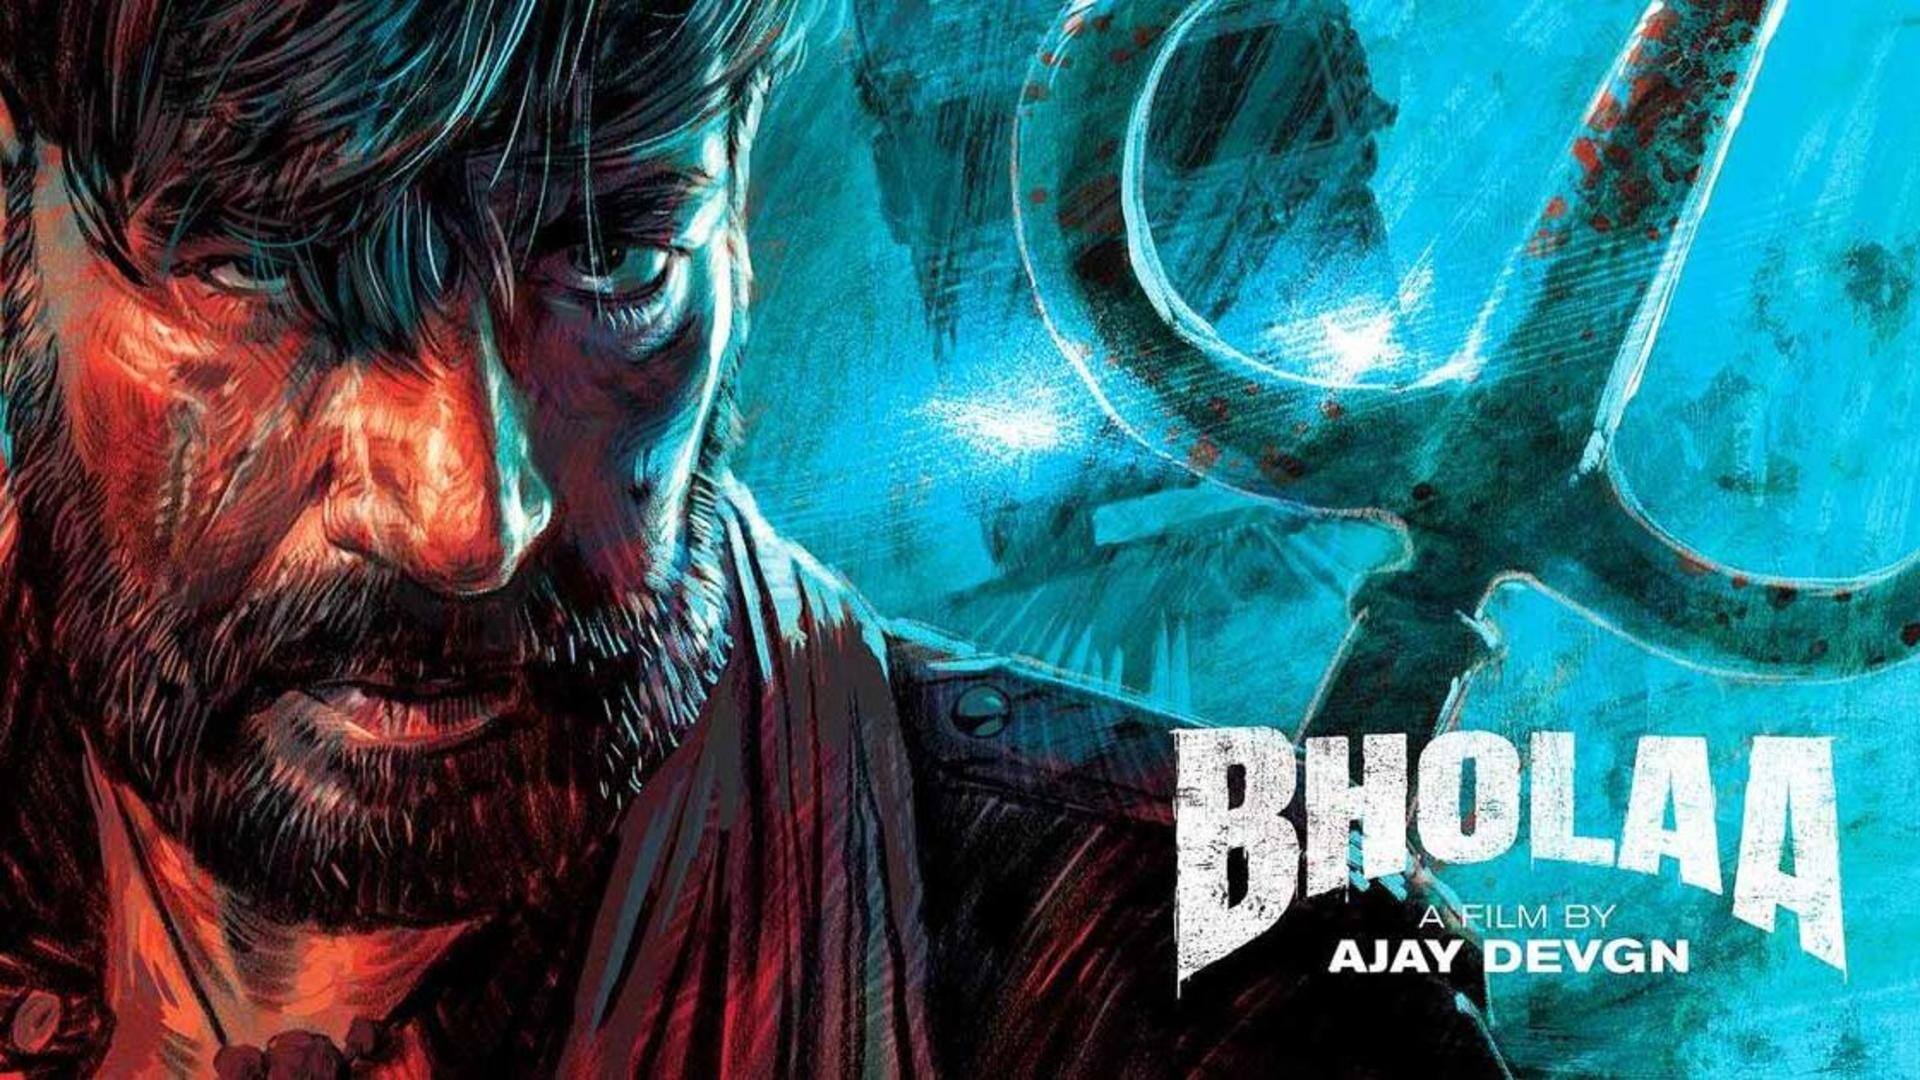 Ajay Devgn's 'Bholaa': When and where to watch on OTT